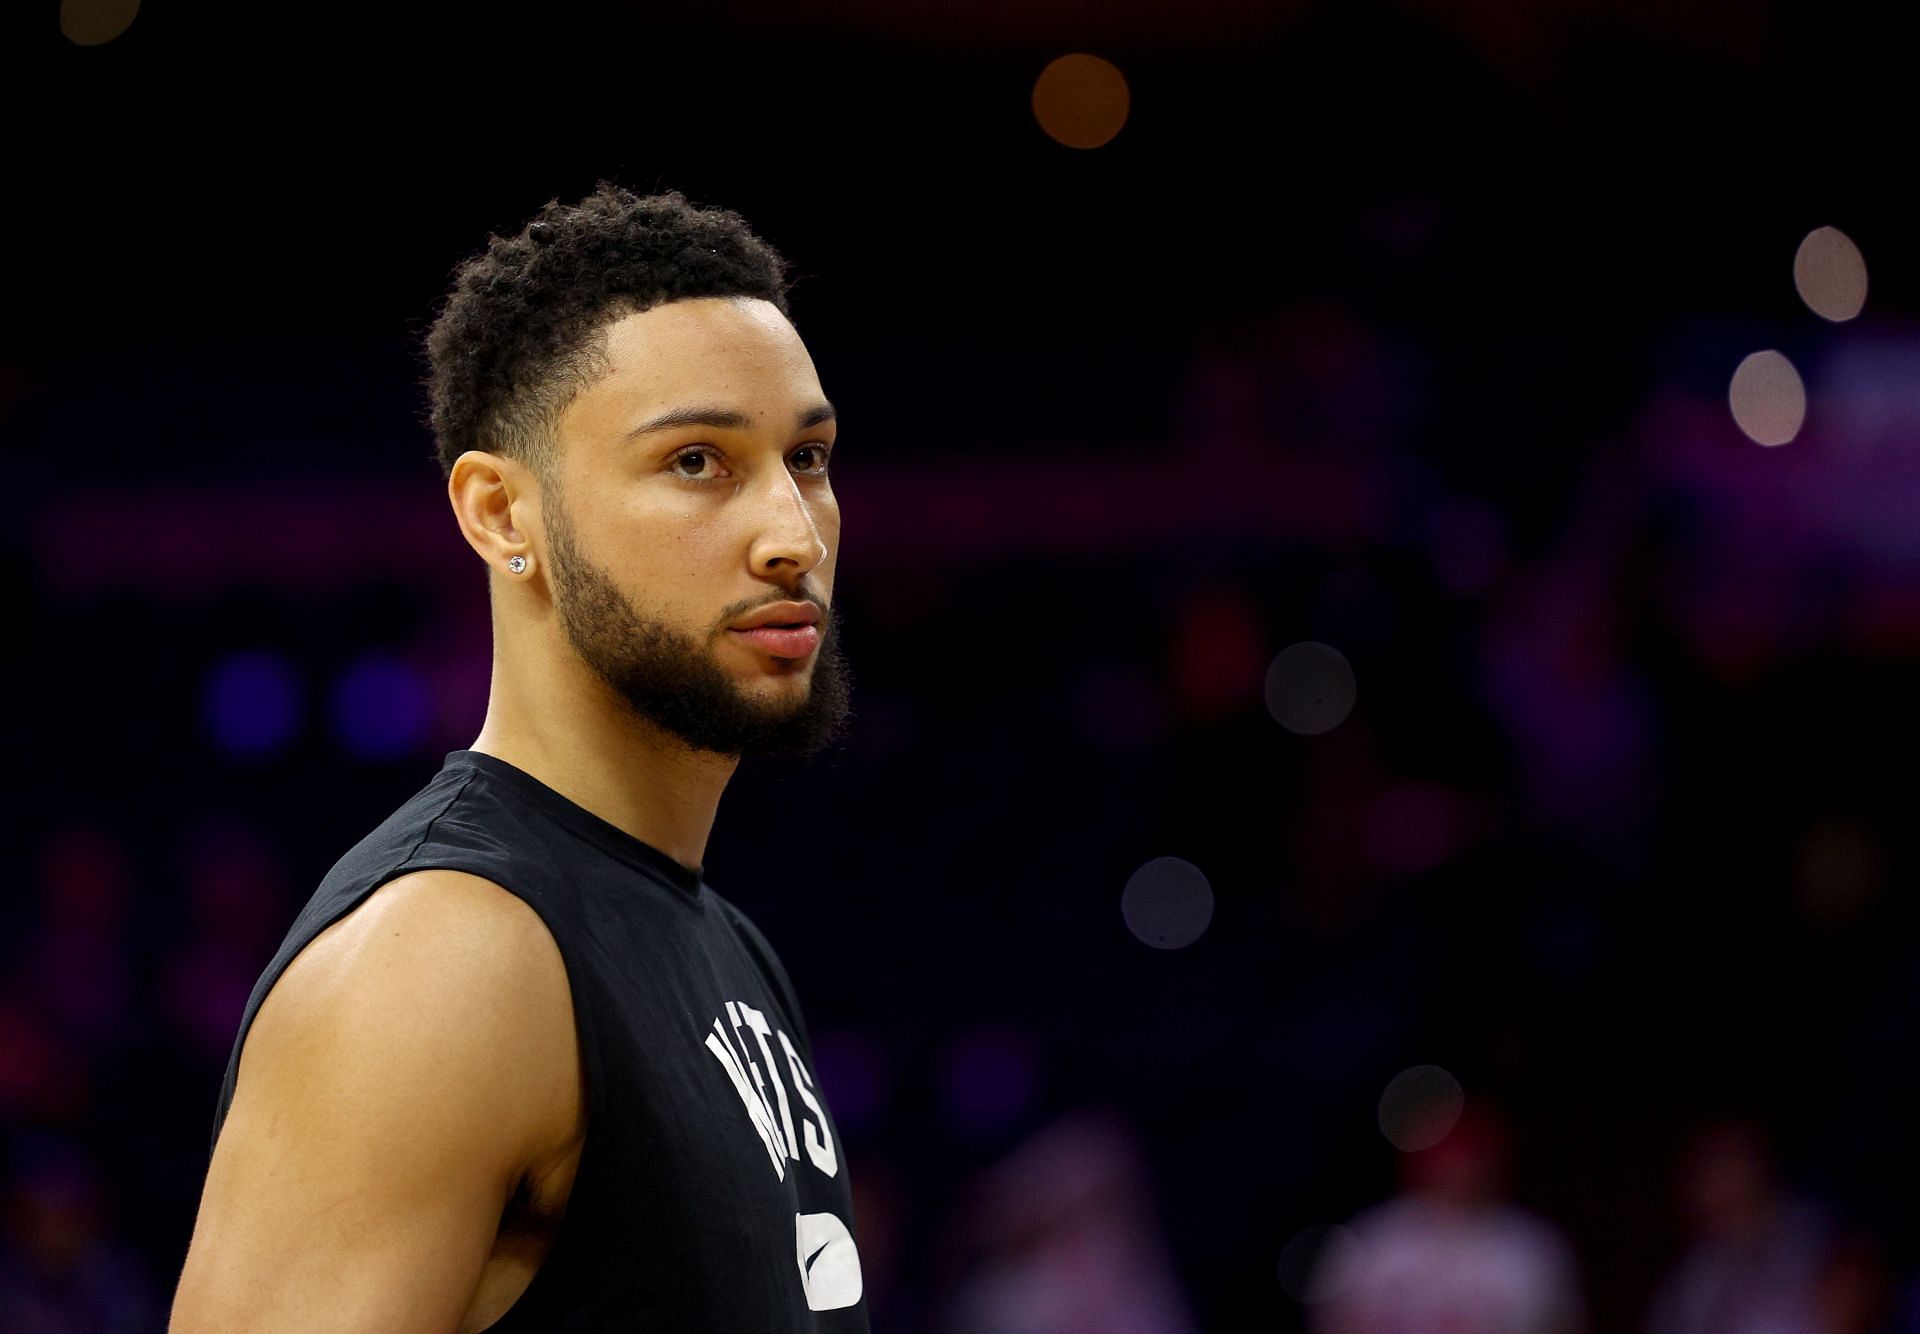 Despite missing the entire season due to a bad back, Ben Simmons still claims his back is sore.